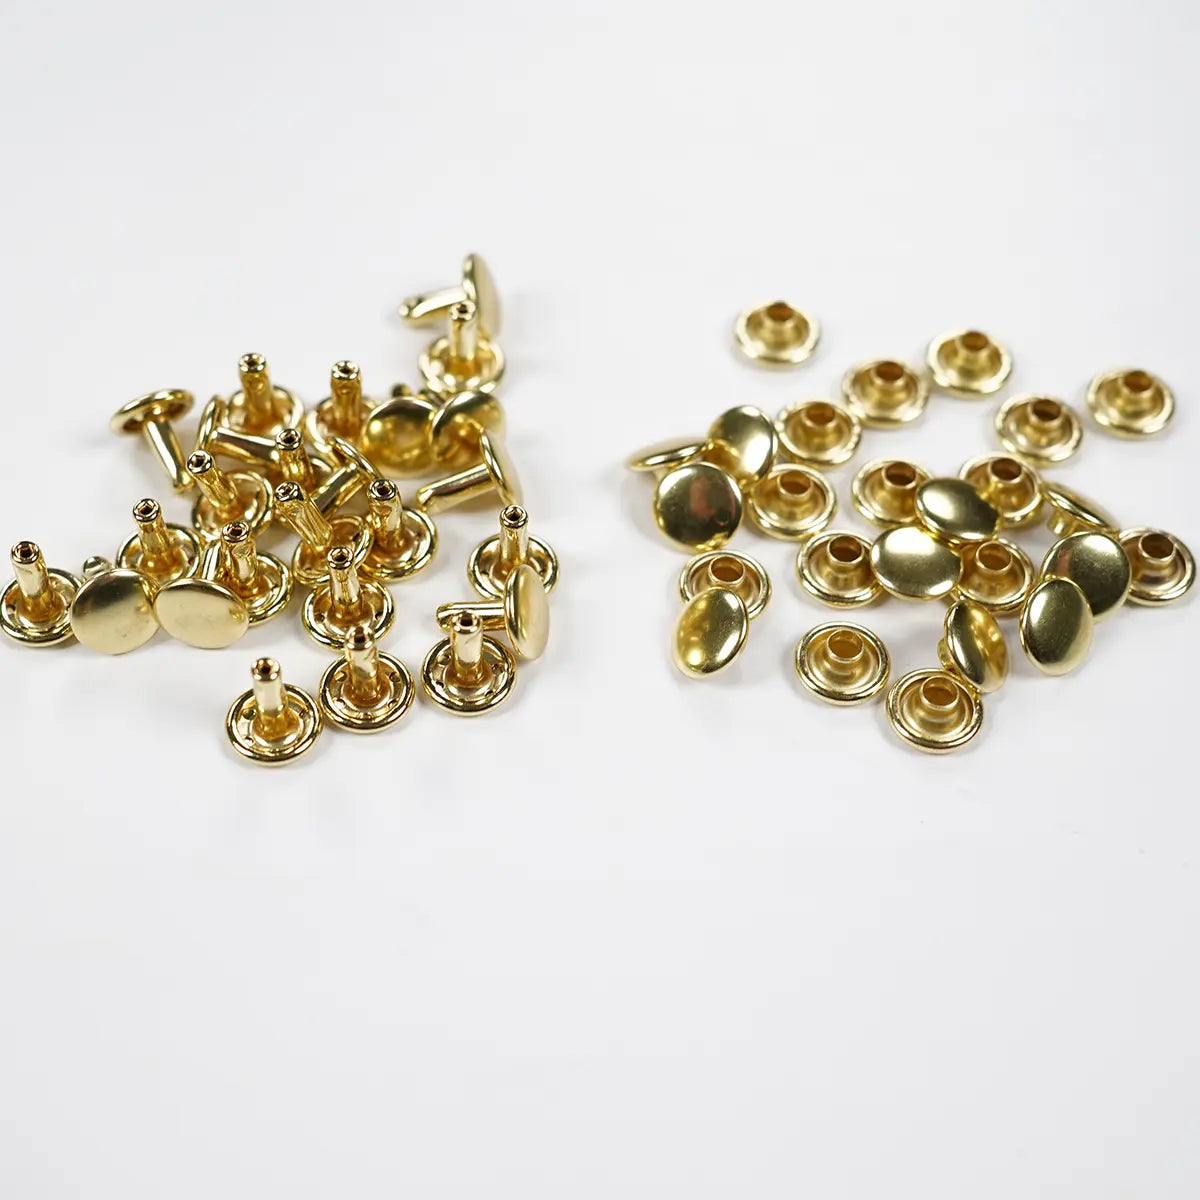 9.2mm x 9.5mm Solid Brass Double Cap Rivets 25 Pack